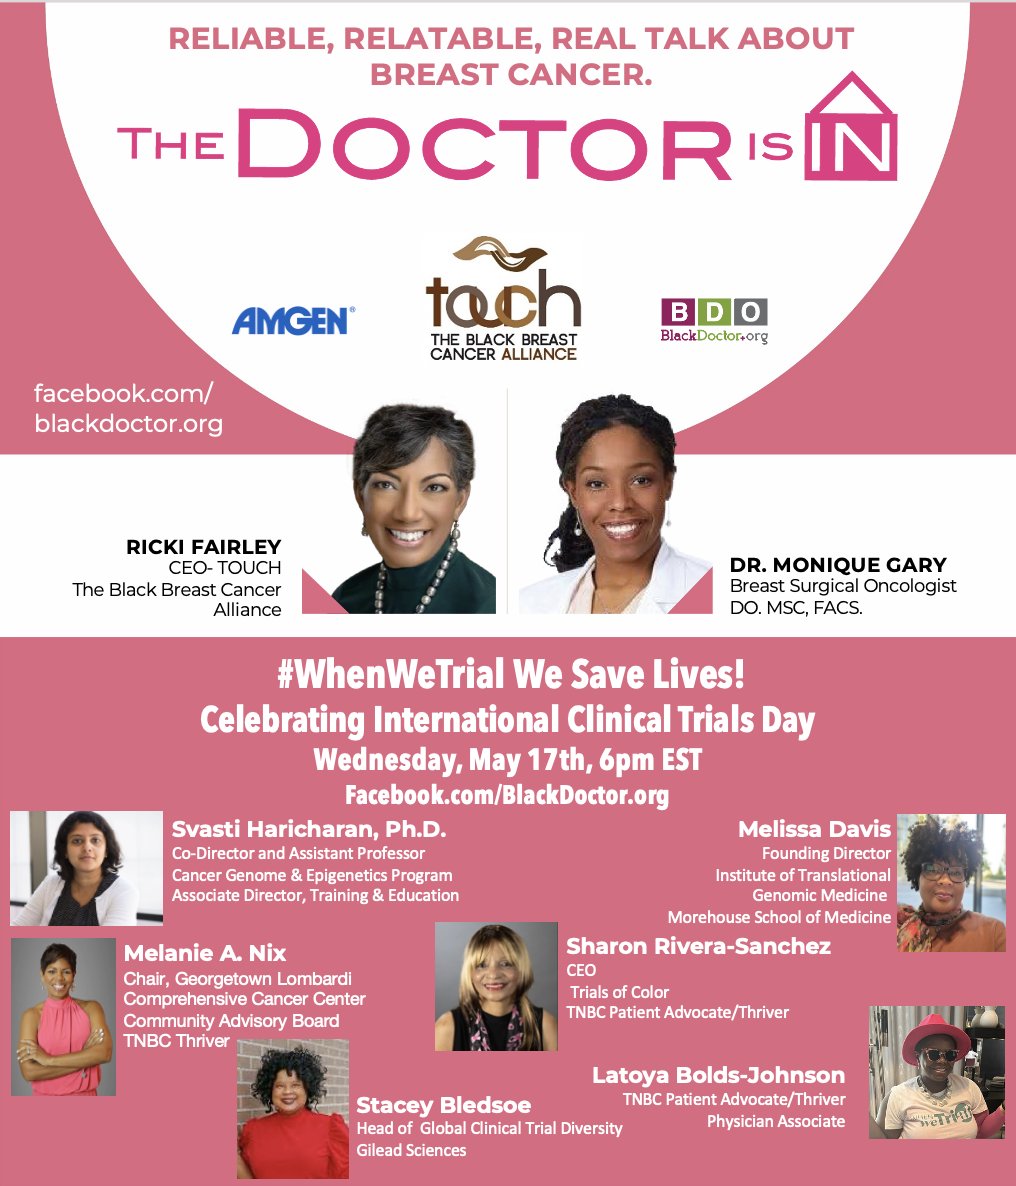 #WhenWeTrial #WeSaveLives
Celebrating #InternationalClinicalTrialsDay
Our #WhenWeTrial Movement is driving the trial recruiting of Black women but we all have much more work do. @MeliD32 @svastiharichar1 @GileadSciences @lombardiCancer @ColorTrials 
#WhenWeTrial @blackdoctor_org